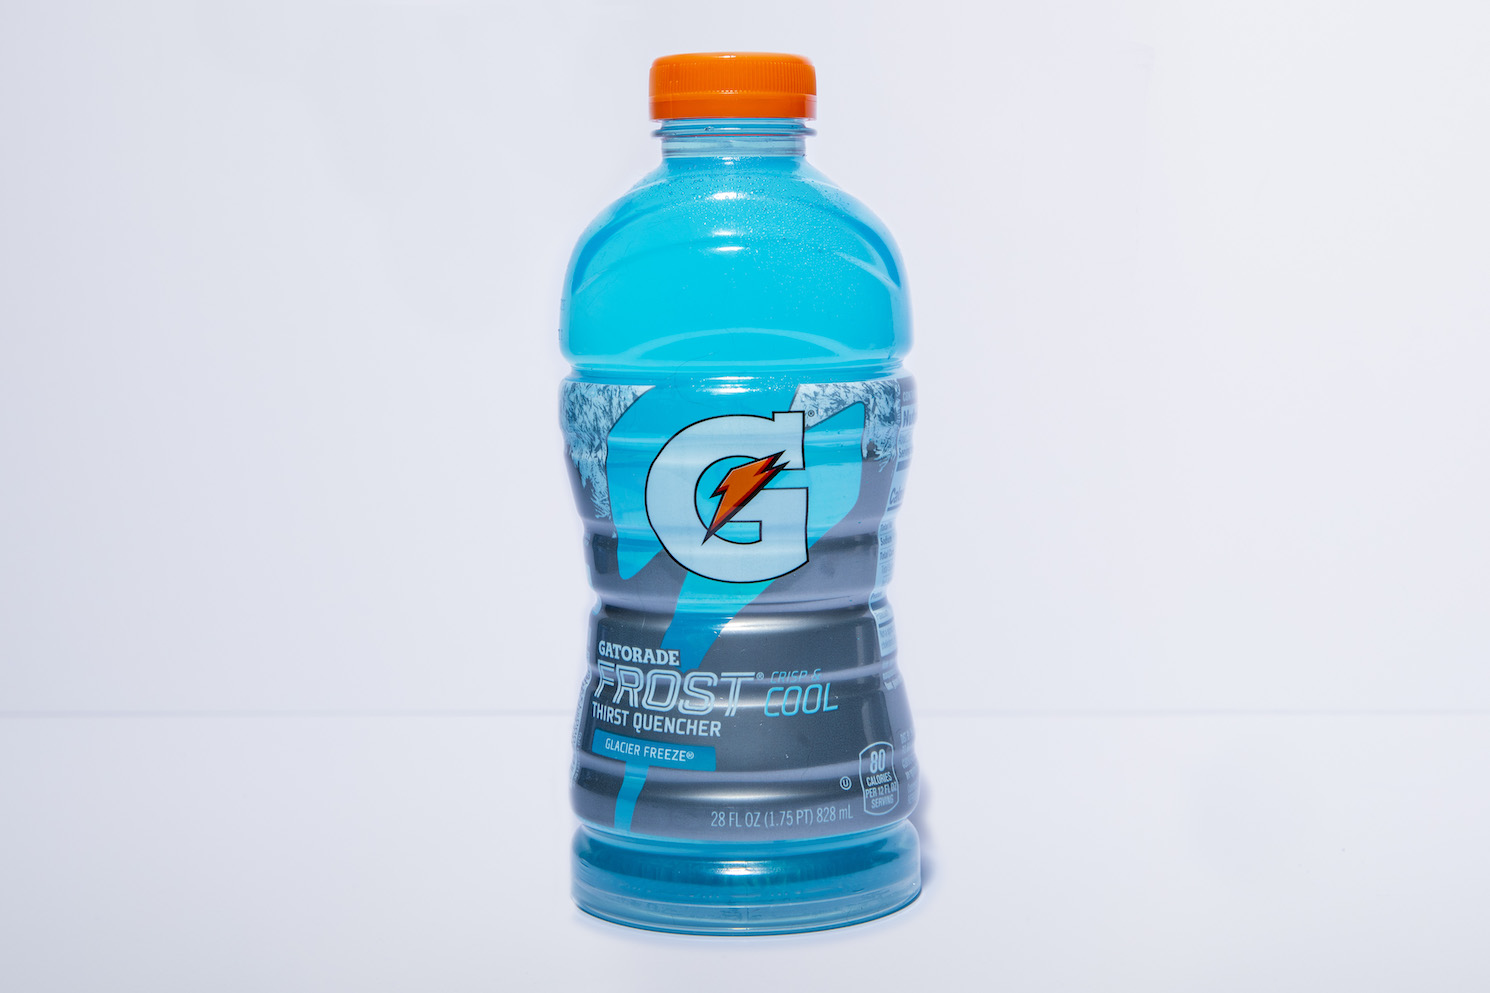 A bottle of blue Gatorade against a white background.